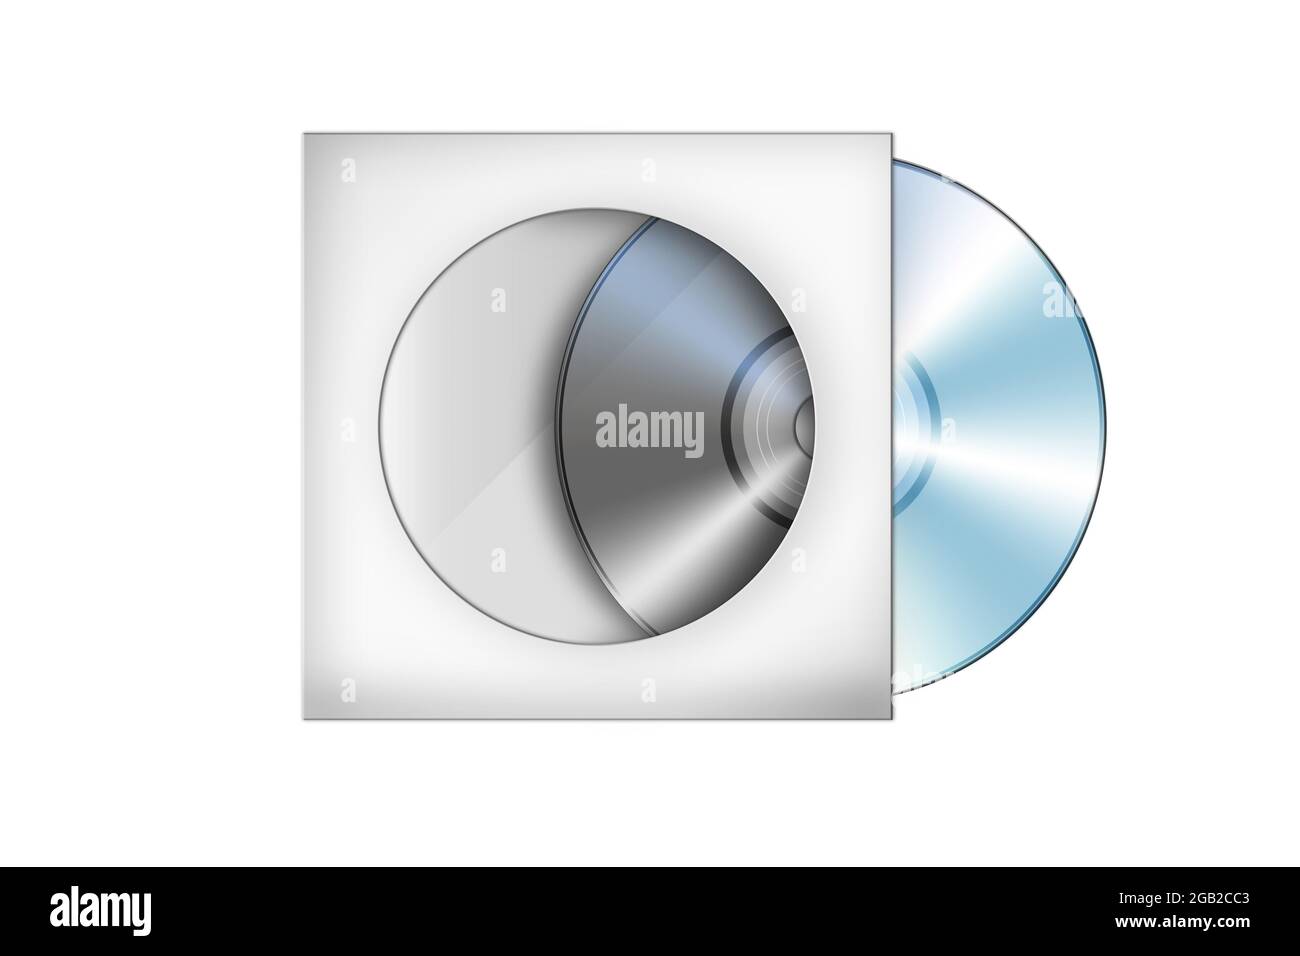 Compact disk with cover illustration (cd, case, dvd) isolated on white background. with clipping path. Stock Photo